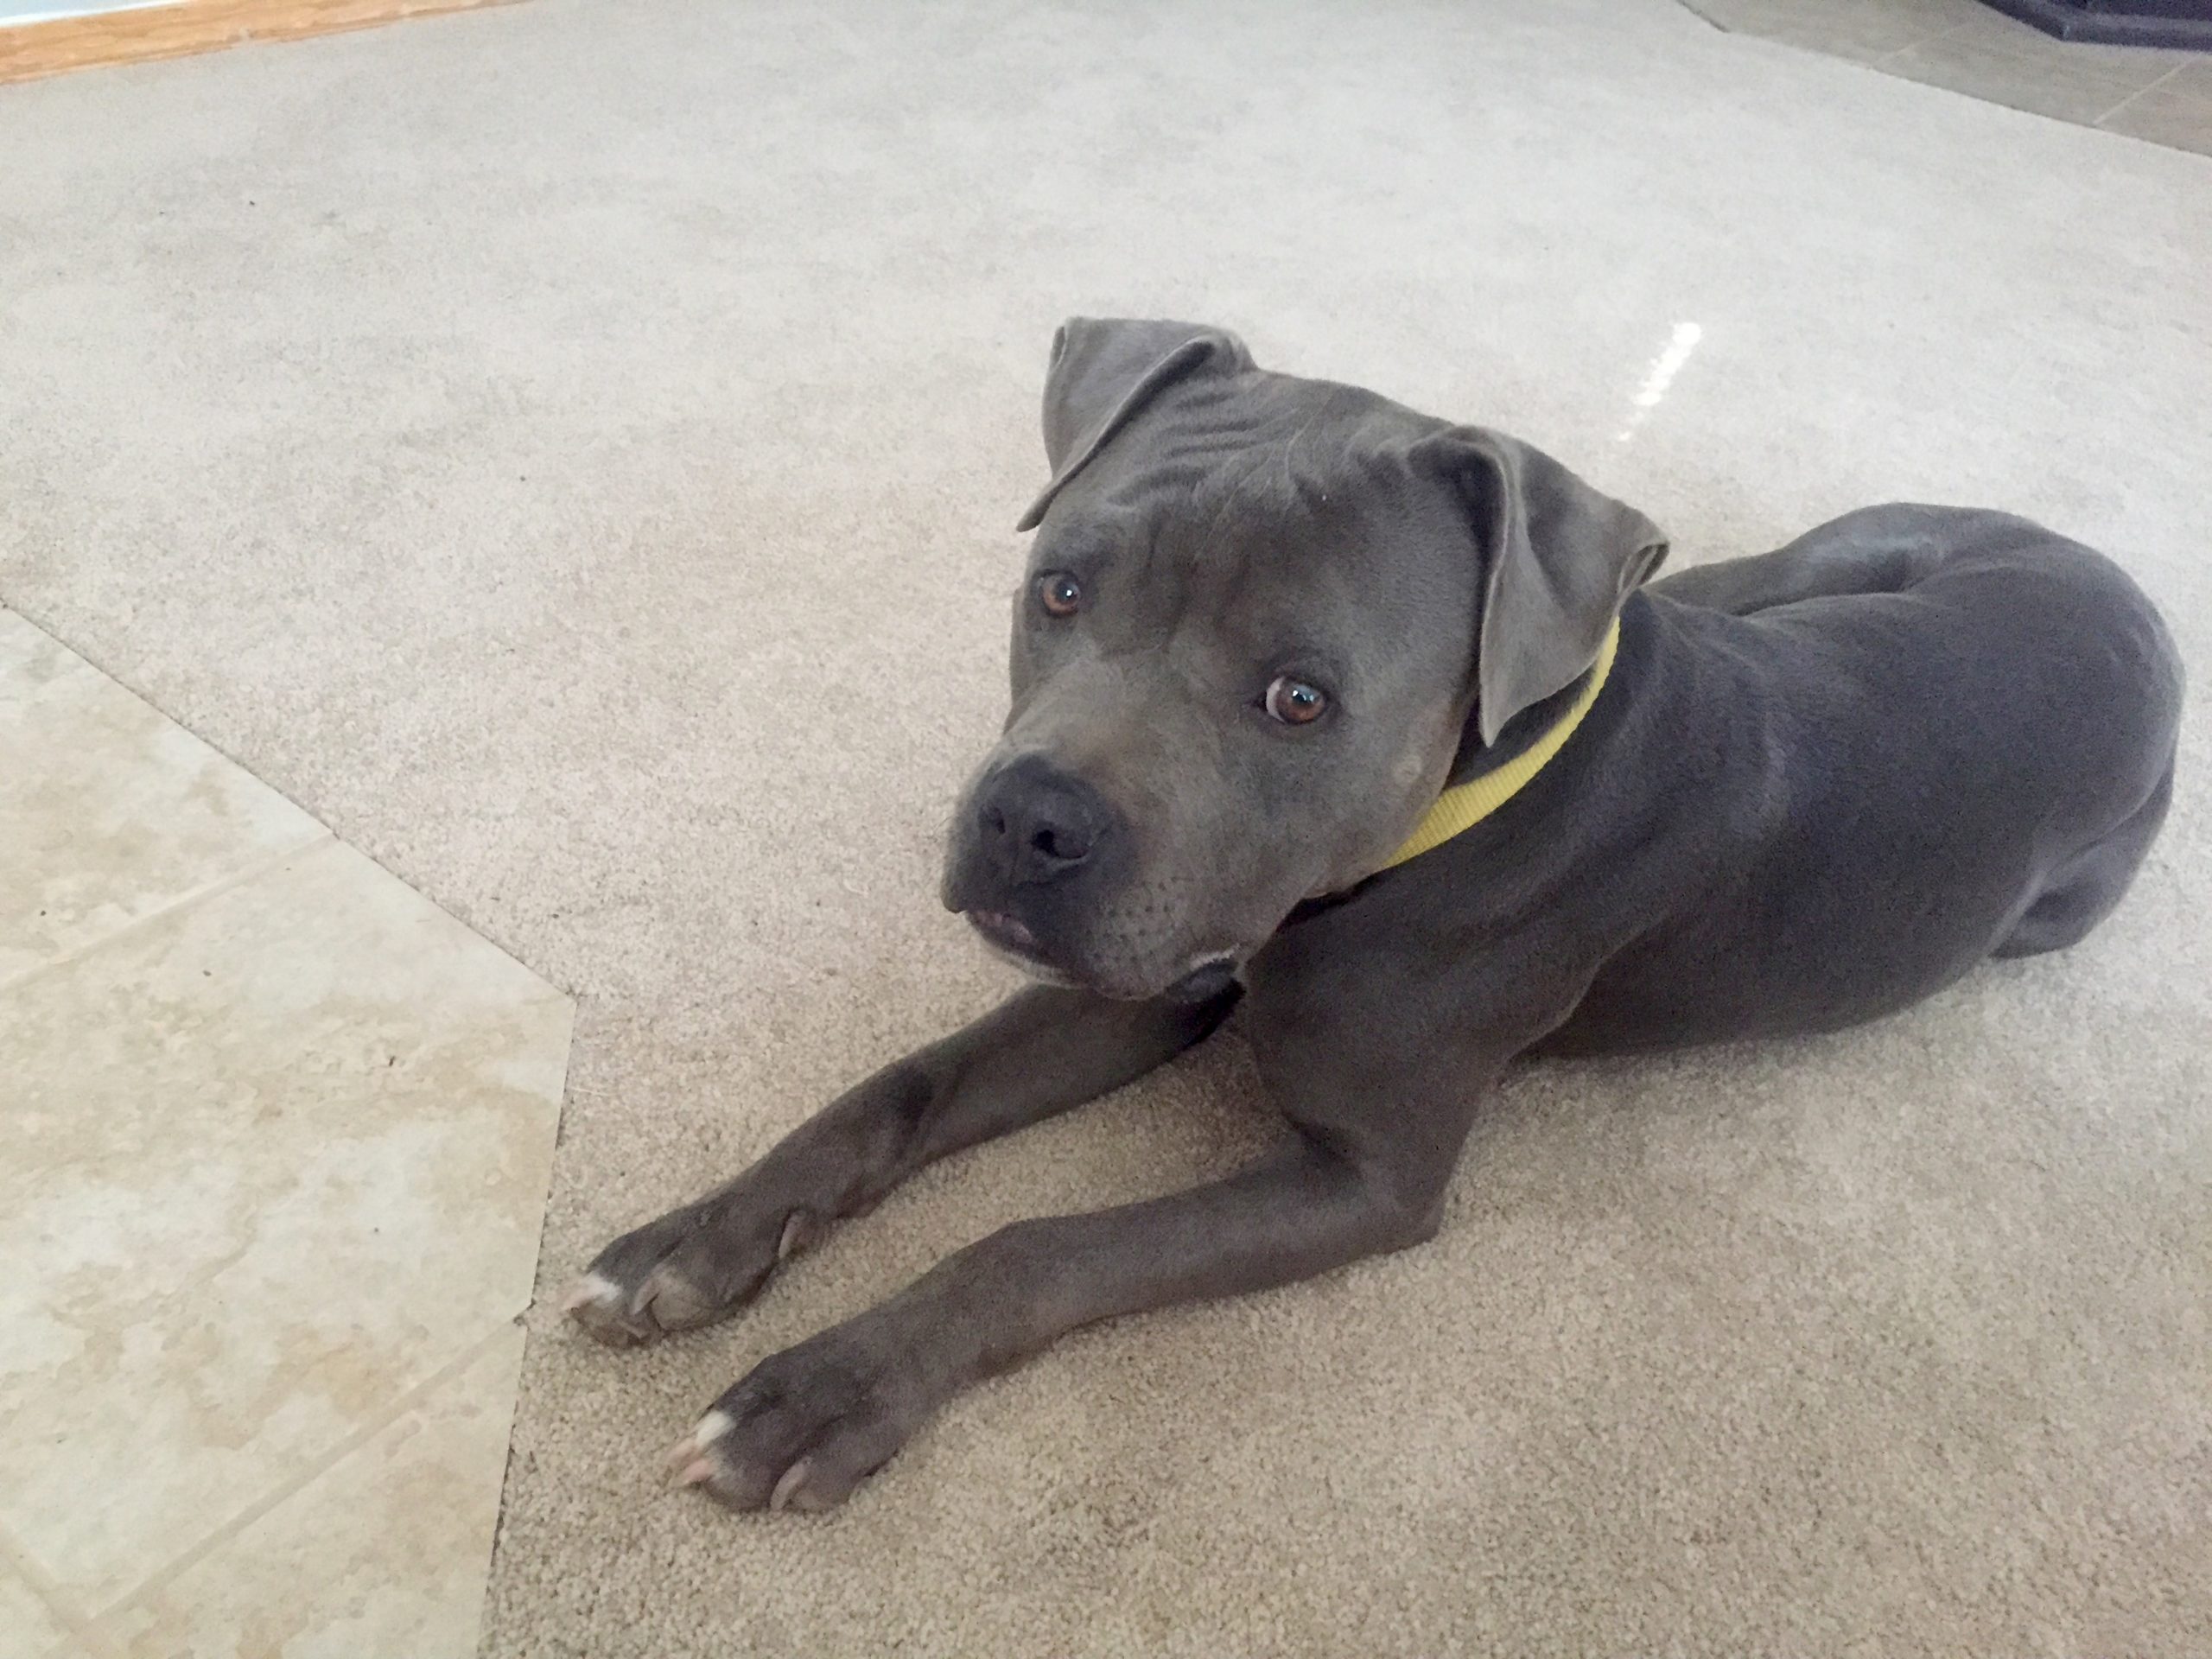 Is the Cane Corso Pitbull mix a good choice for me?